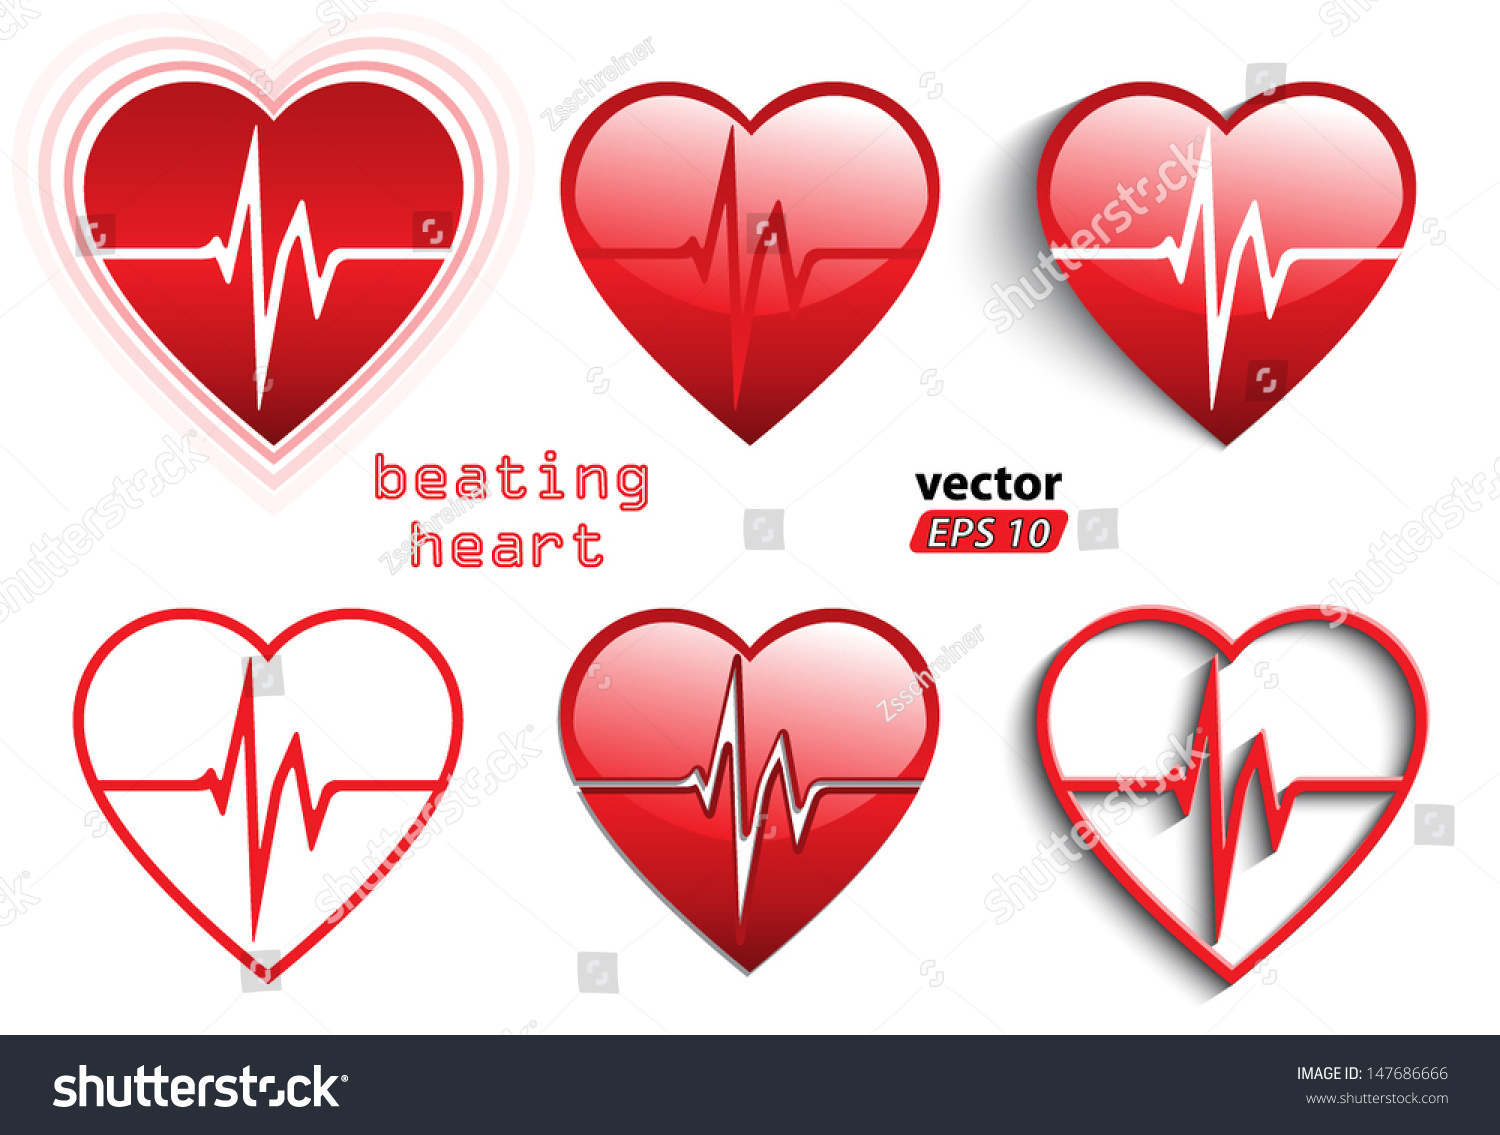 Heart Symbol Vector Art Icons And Graphics For Free Download